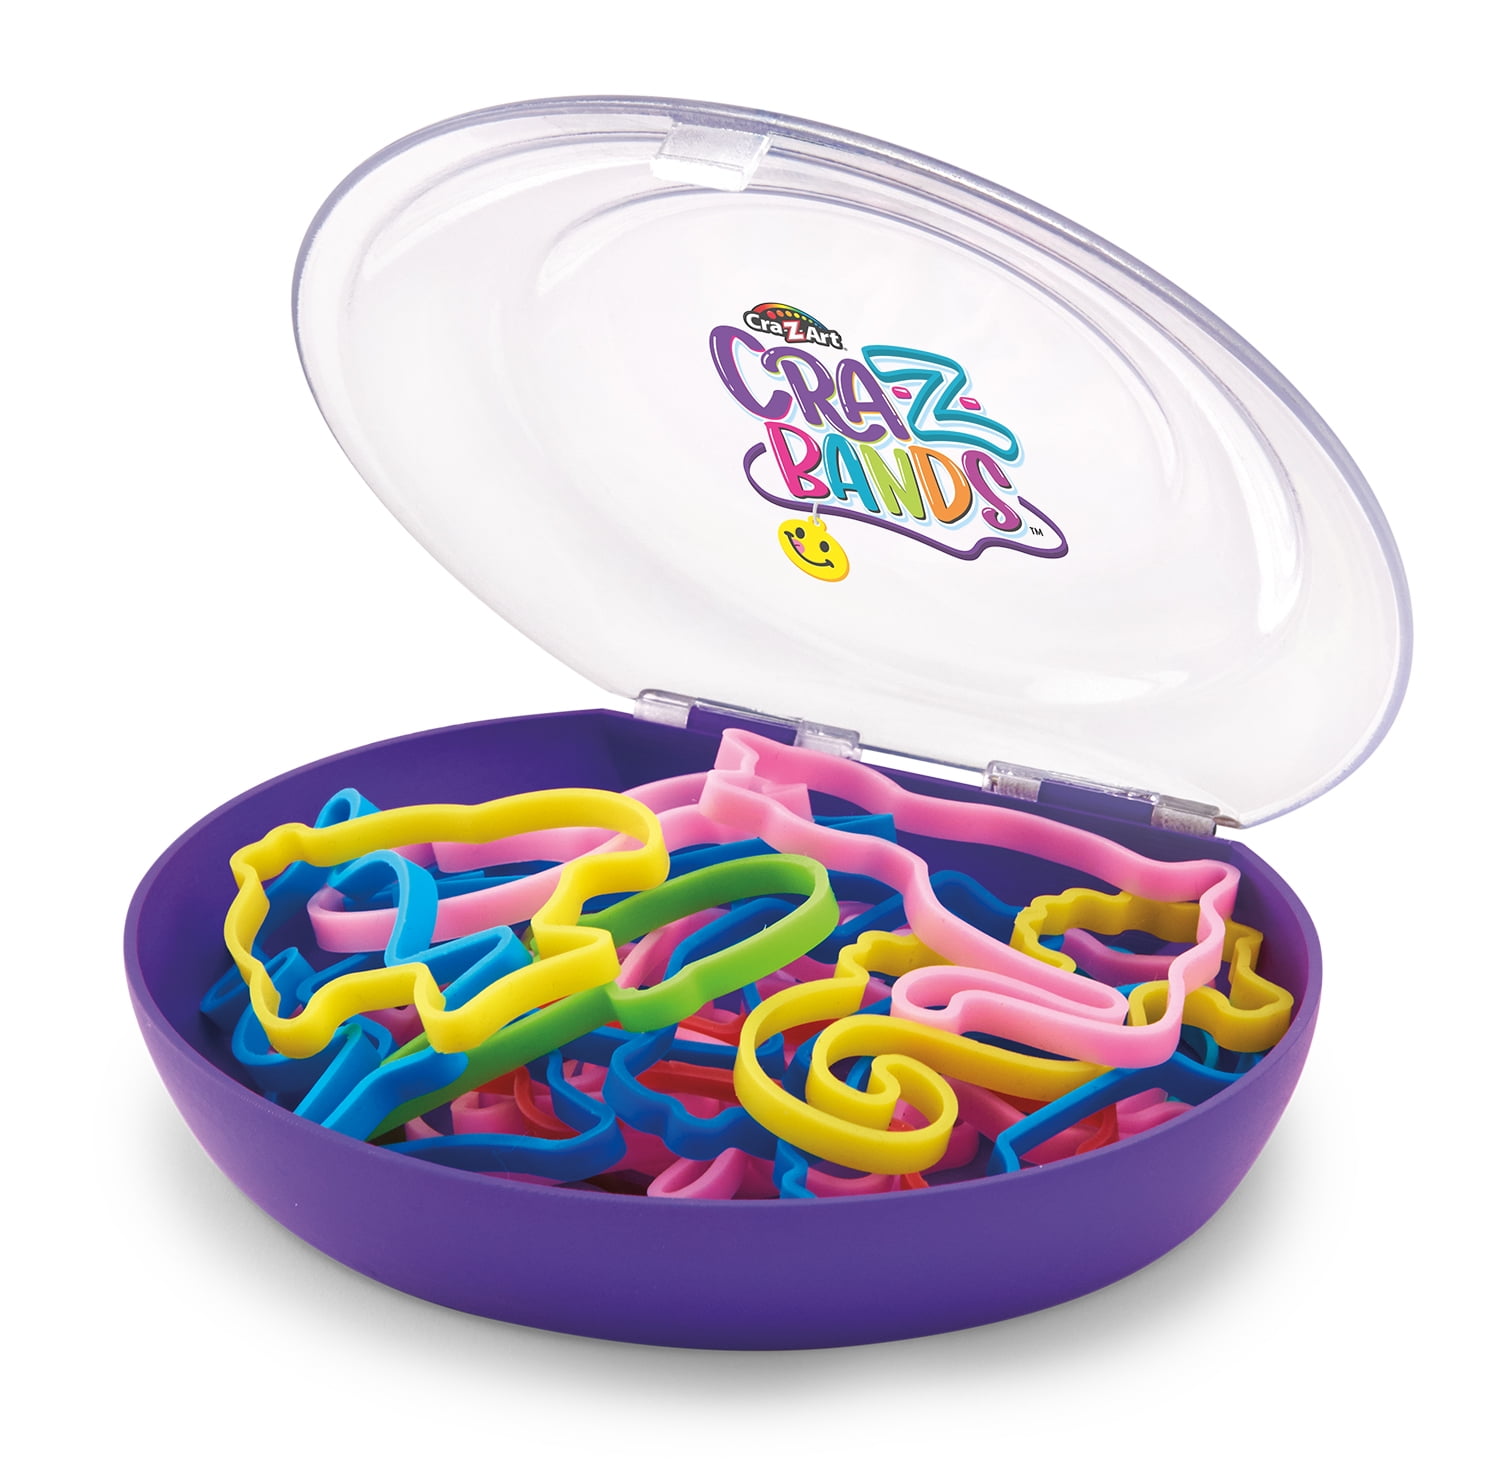 Cra-Z-Art - 💲💲HOLIDAY DEAL! The Be Inspired Cra-Z-Loom 3-in-1 Rubber Band  Bracelet Extravaganza Kit is currently on sale from $19.90 to $10.00 at  @Walmart. Get yours before this amazing deal ends.  #